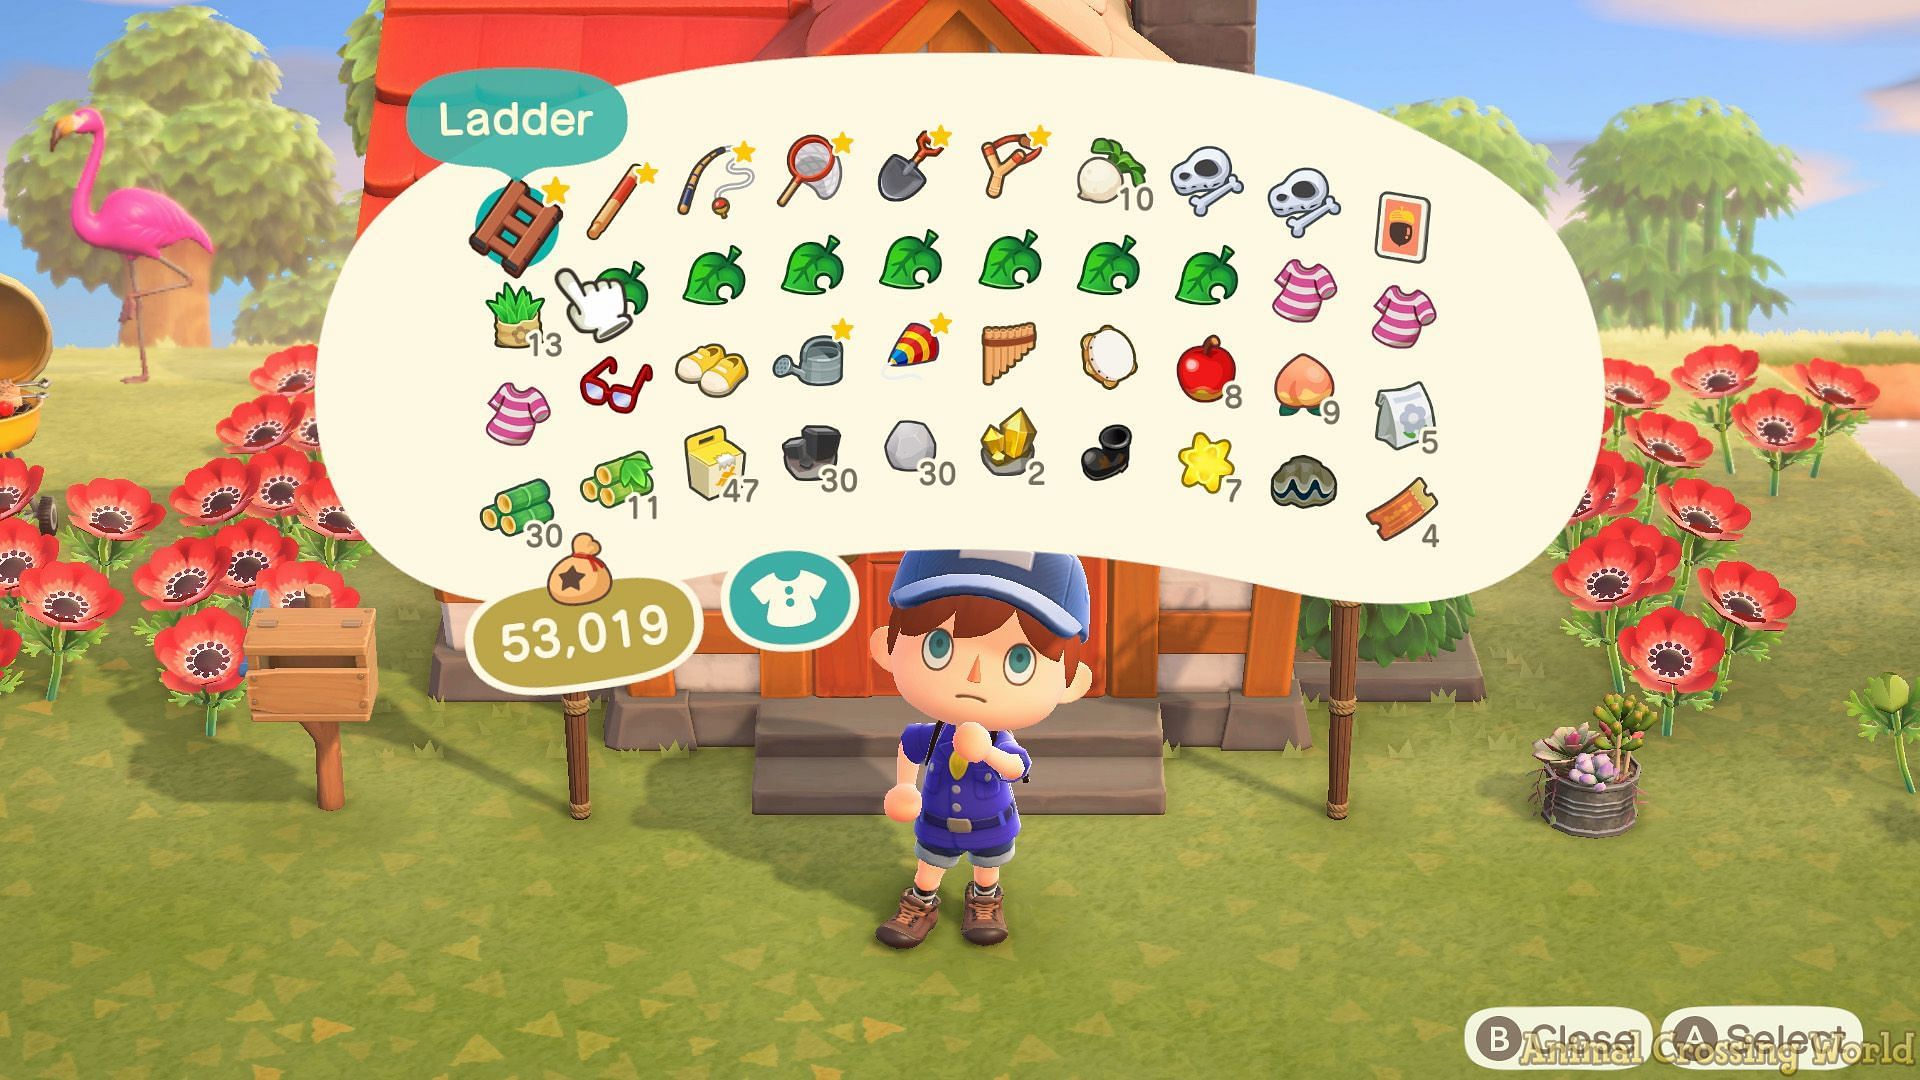 Animal Crossing: New Horizons fans have the opportunity to increase their storage space in the game (Image via Animal Crossing World)